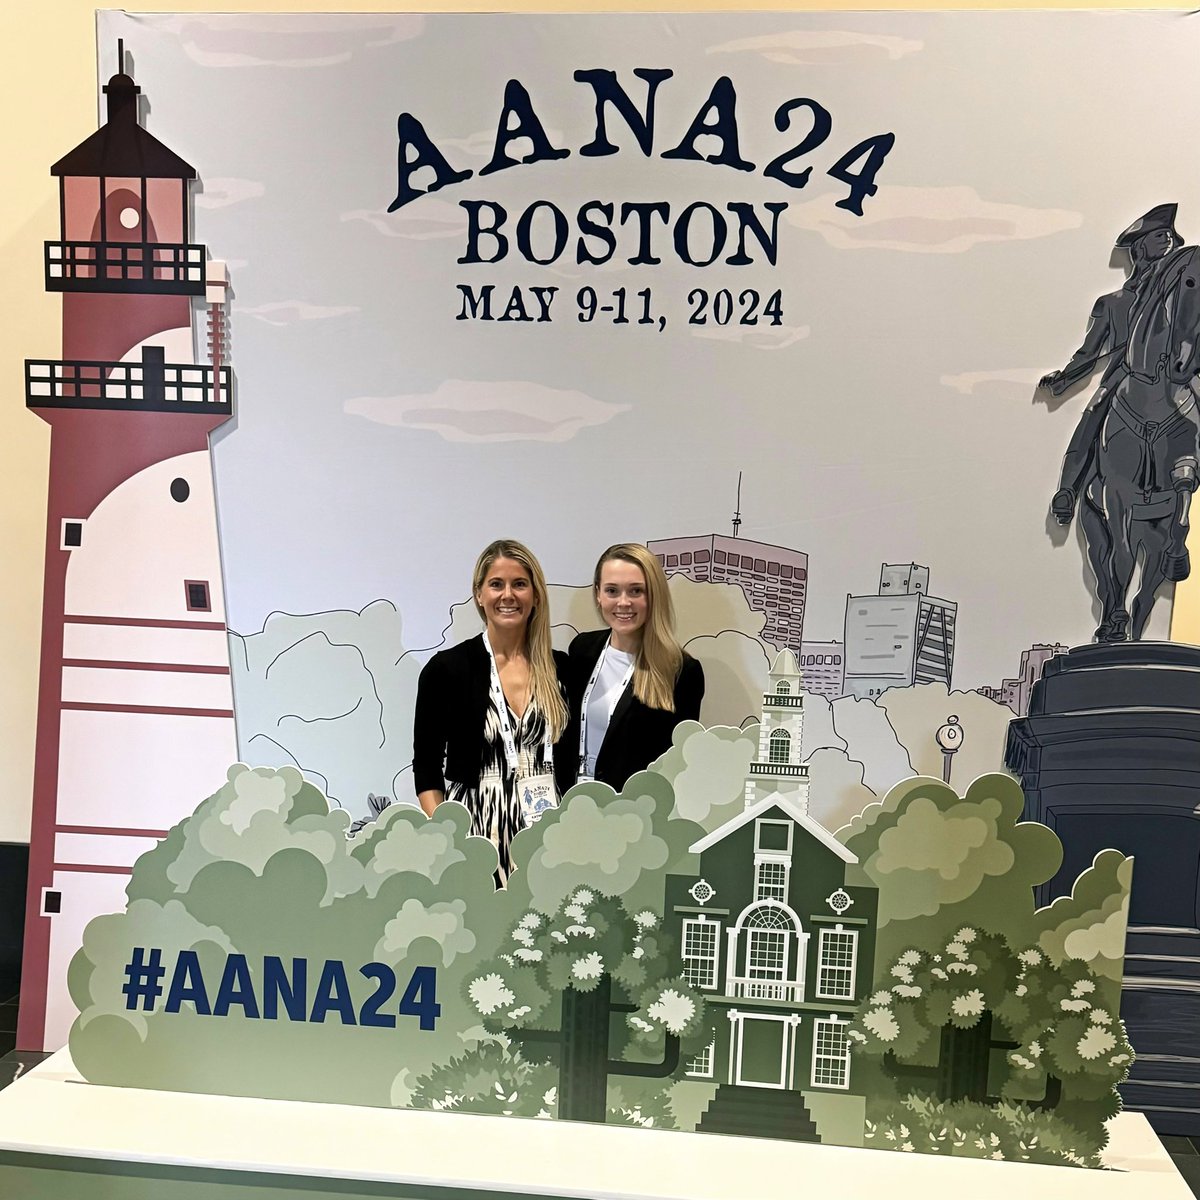 ✨NEW episode is LIVE!✨ We’re coming to you live from the @AANAORG Annual Meeting in Boston, chatting about some of the hot topics at this exceptional meeting! Listen 🎧: podcasts.apple.com/us/podcast/the… #AANA24 #orthotwitter @AshleyBassettMD @cloganmd